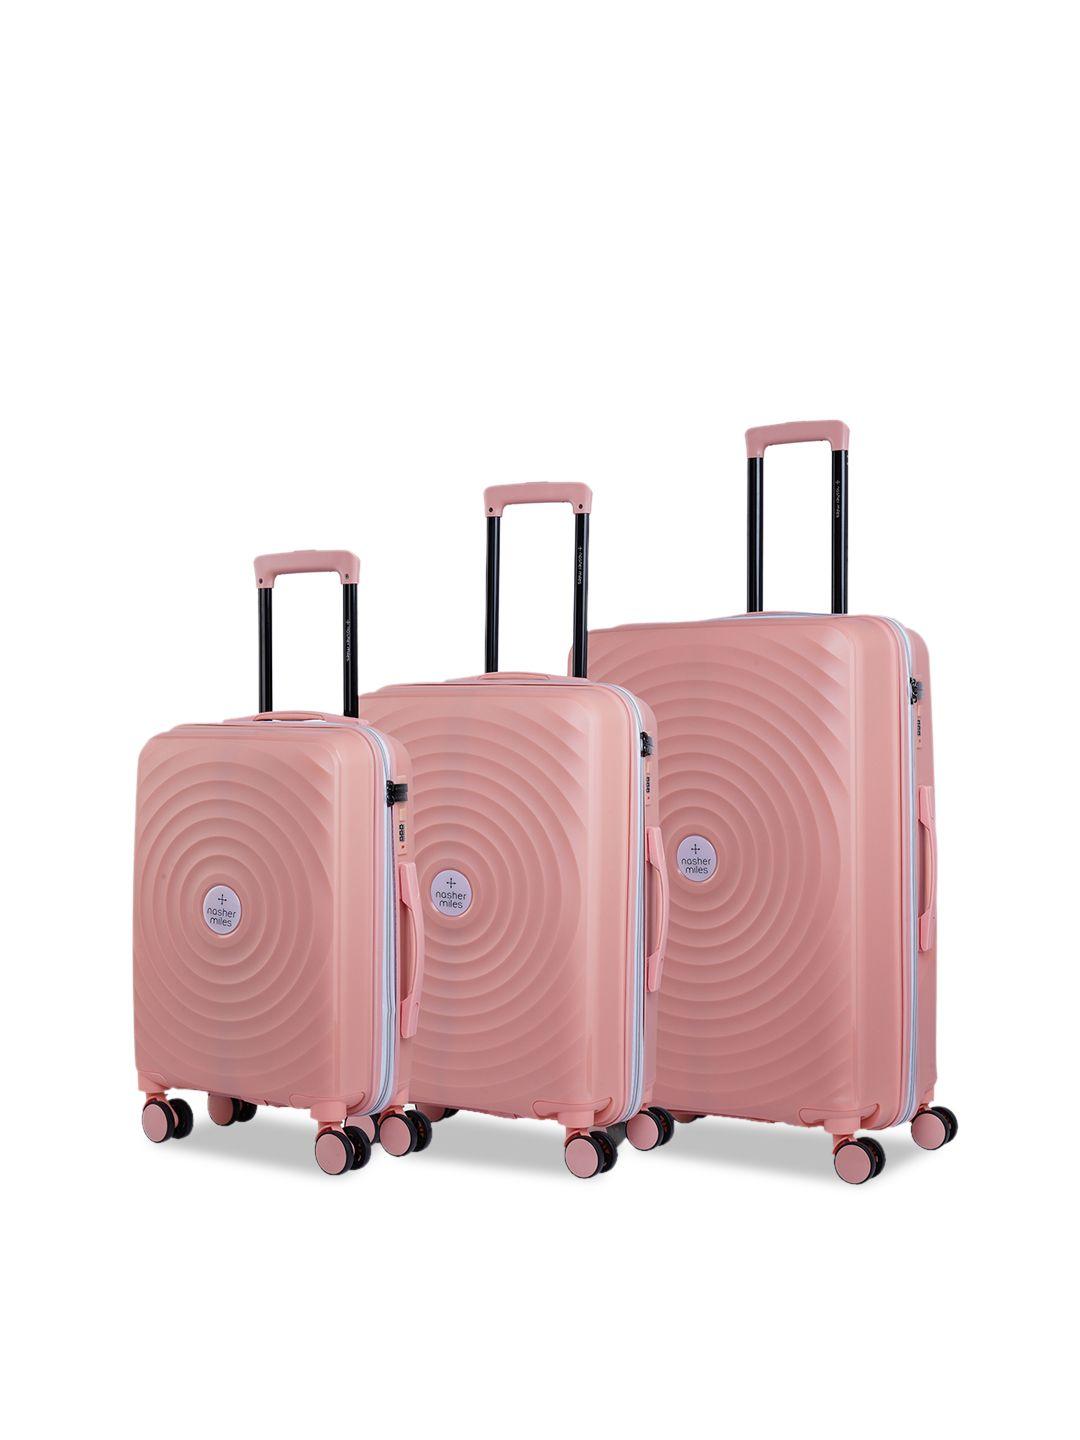 nasher miles set of 3 textured hard-sided trolley bag